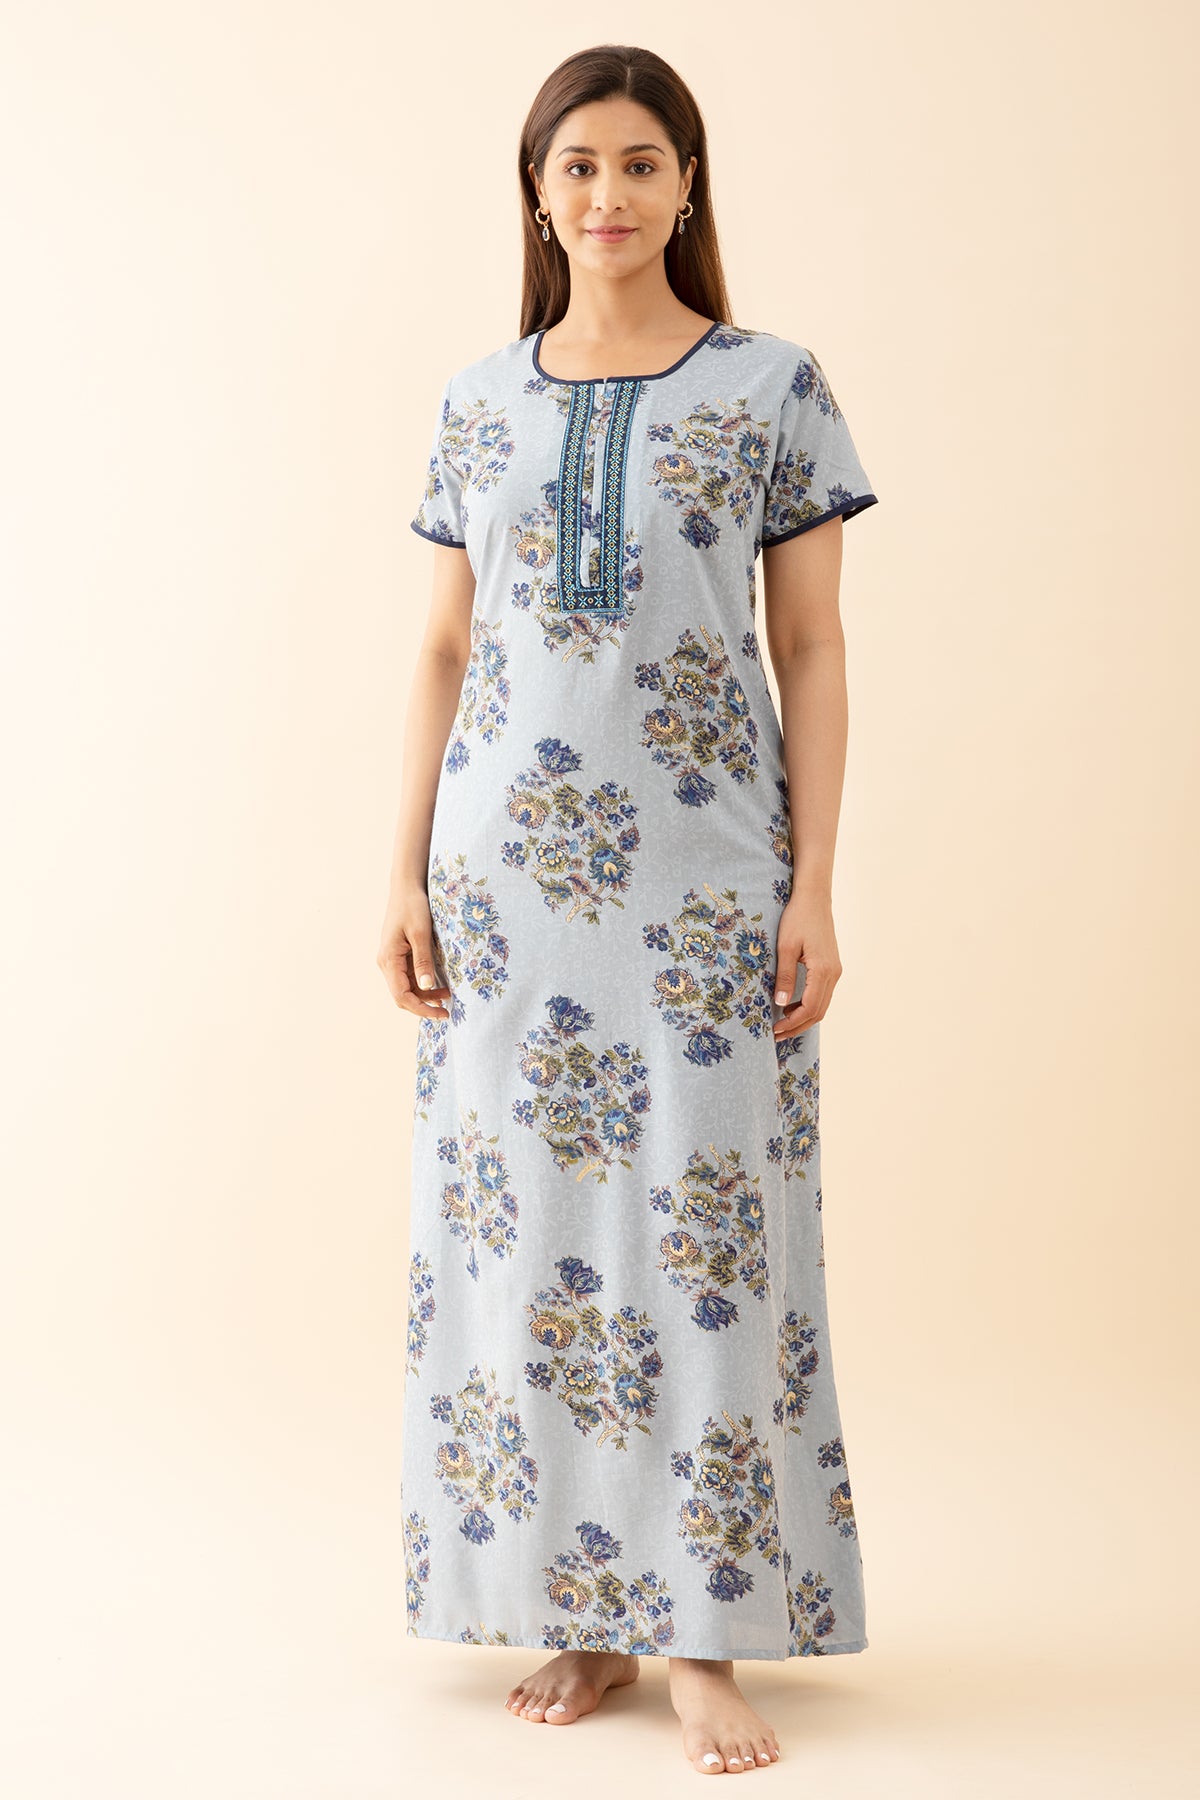 Acanthus Floral Printed Nighty with Embroidered Neckline Blue